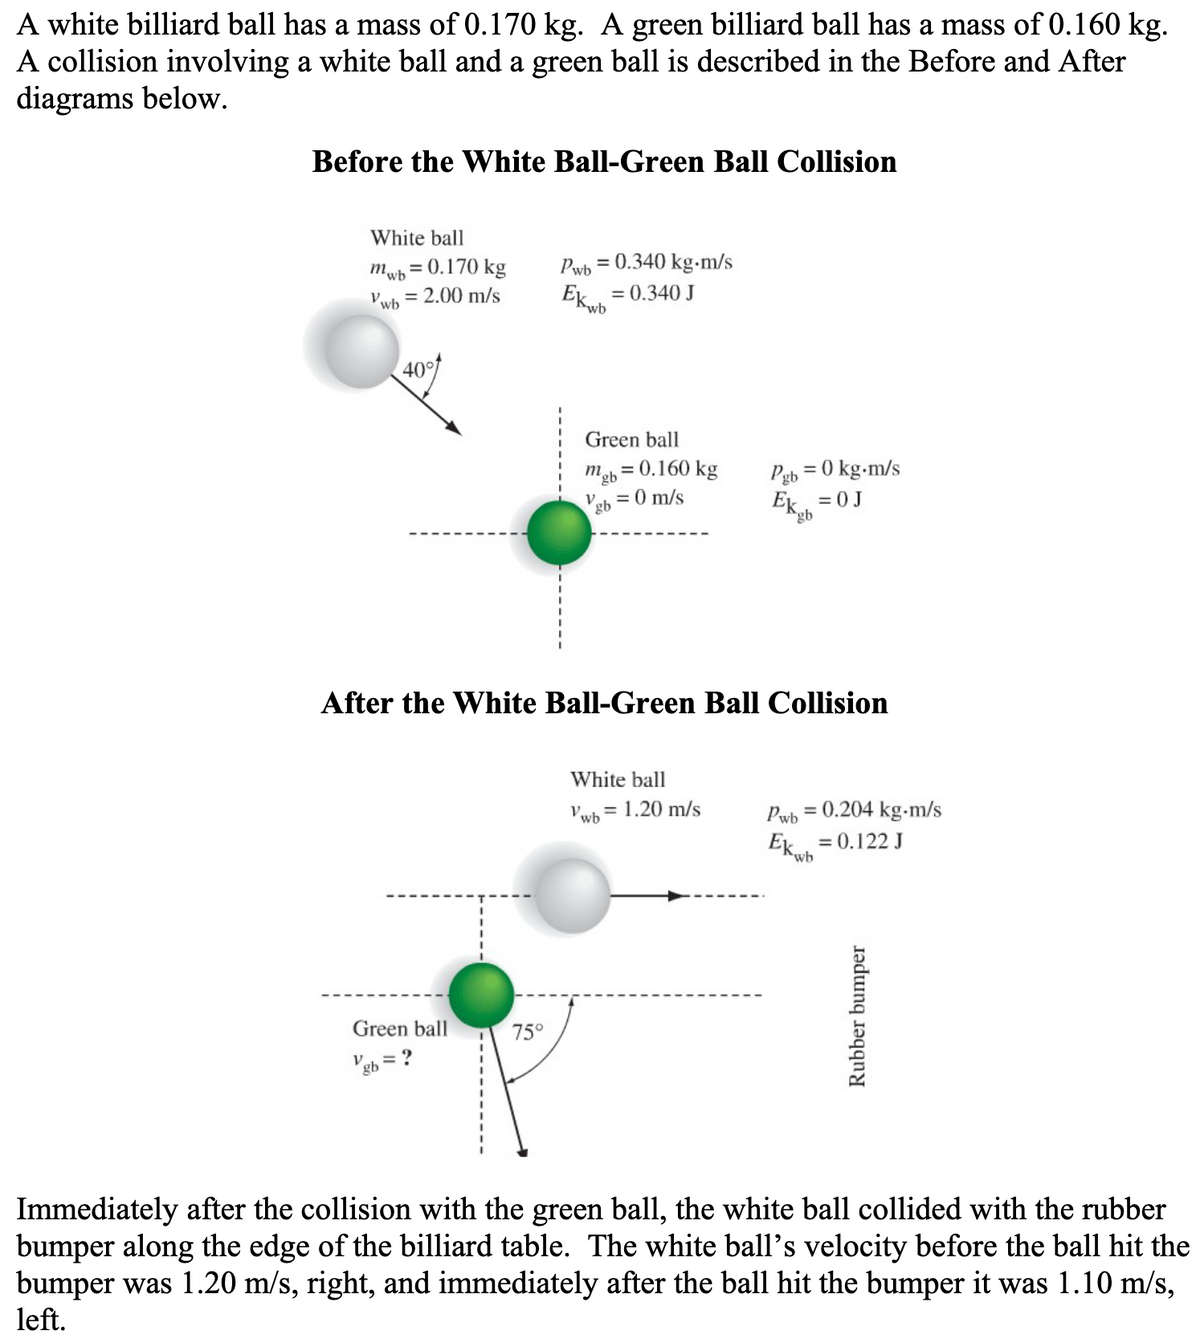 A white billiard ball has a mass of 0.170 kg. A green billiard ball has a mass of 0.160 kg.
A collision involving a white ball and a green ball is described in the Before and After
diagrams below.
Before the White Ball-Green Ball Collision
White ball
= 0.170 kg
mwb
Pwb = 0.340 kg-m/s
= 2.00 m/s
V wb
= 0.340 J
wb
40
Green ball
= 0.160 kg
Pgh = 0 kg-m/s
m.
%3D
'gb
Ek, = 0J
`gb
Vgb = 0 m/s
Aft
the White Ball-Green Ball Collision
White ball
Vwh = 1.20 m/s
Pwb
= 0.204 kg-m/s
%3D
= 0.122 J
wb
Green ball
75°
Vgb = ?
Immediately after the collision with the green ball, the white ball collided with the rubber
bumper along the edge of the billiard table. The white ball's velocity before the ball hit the
bumper was 1.20 m/s, right, and immediately after the ball hit the bumper it was 1.10 m/s,
left.
Rubber bumper
